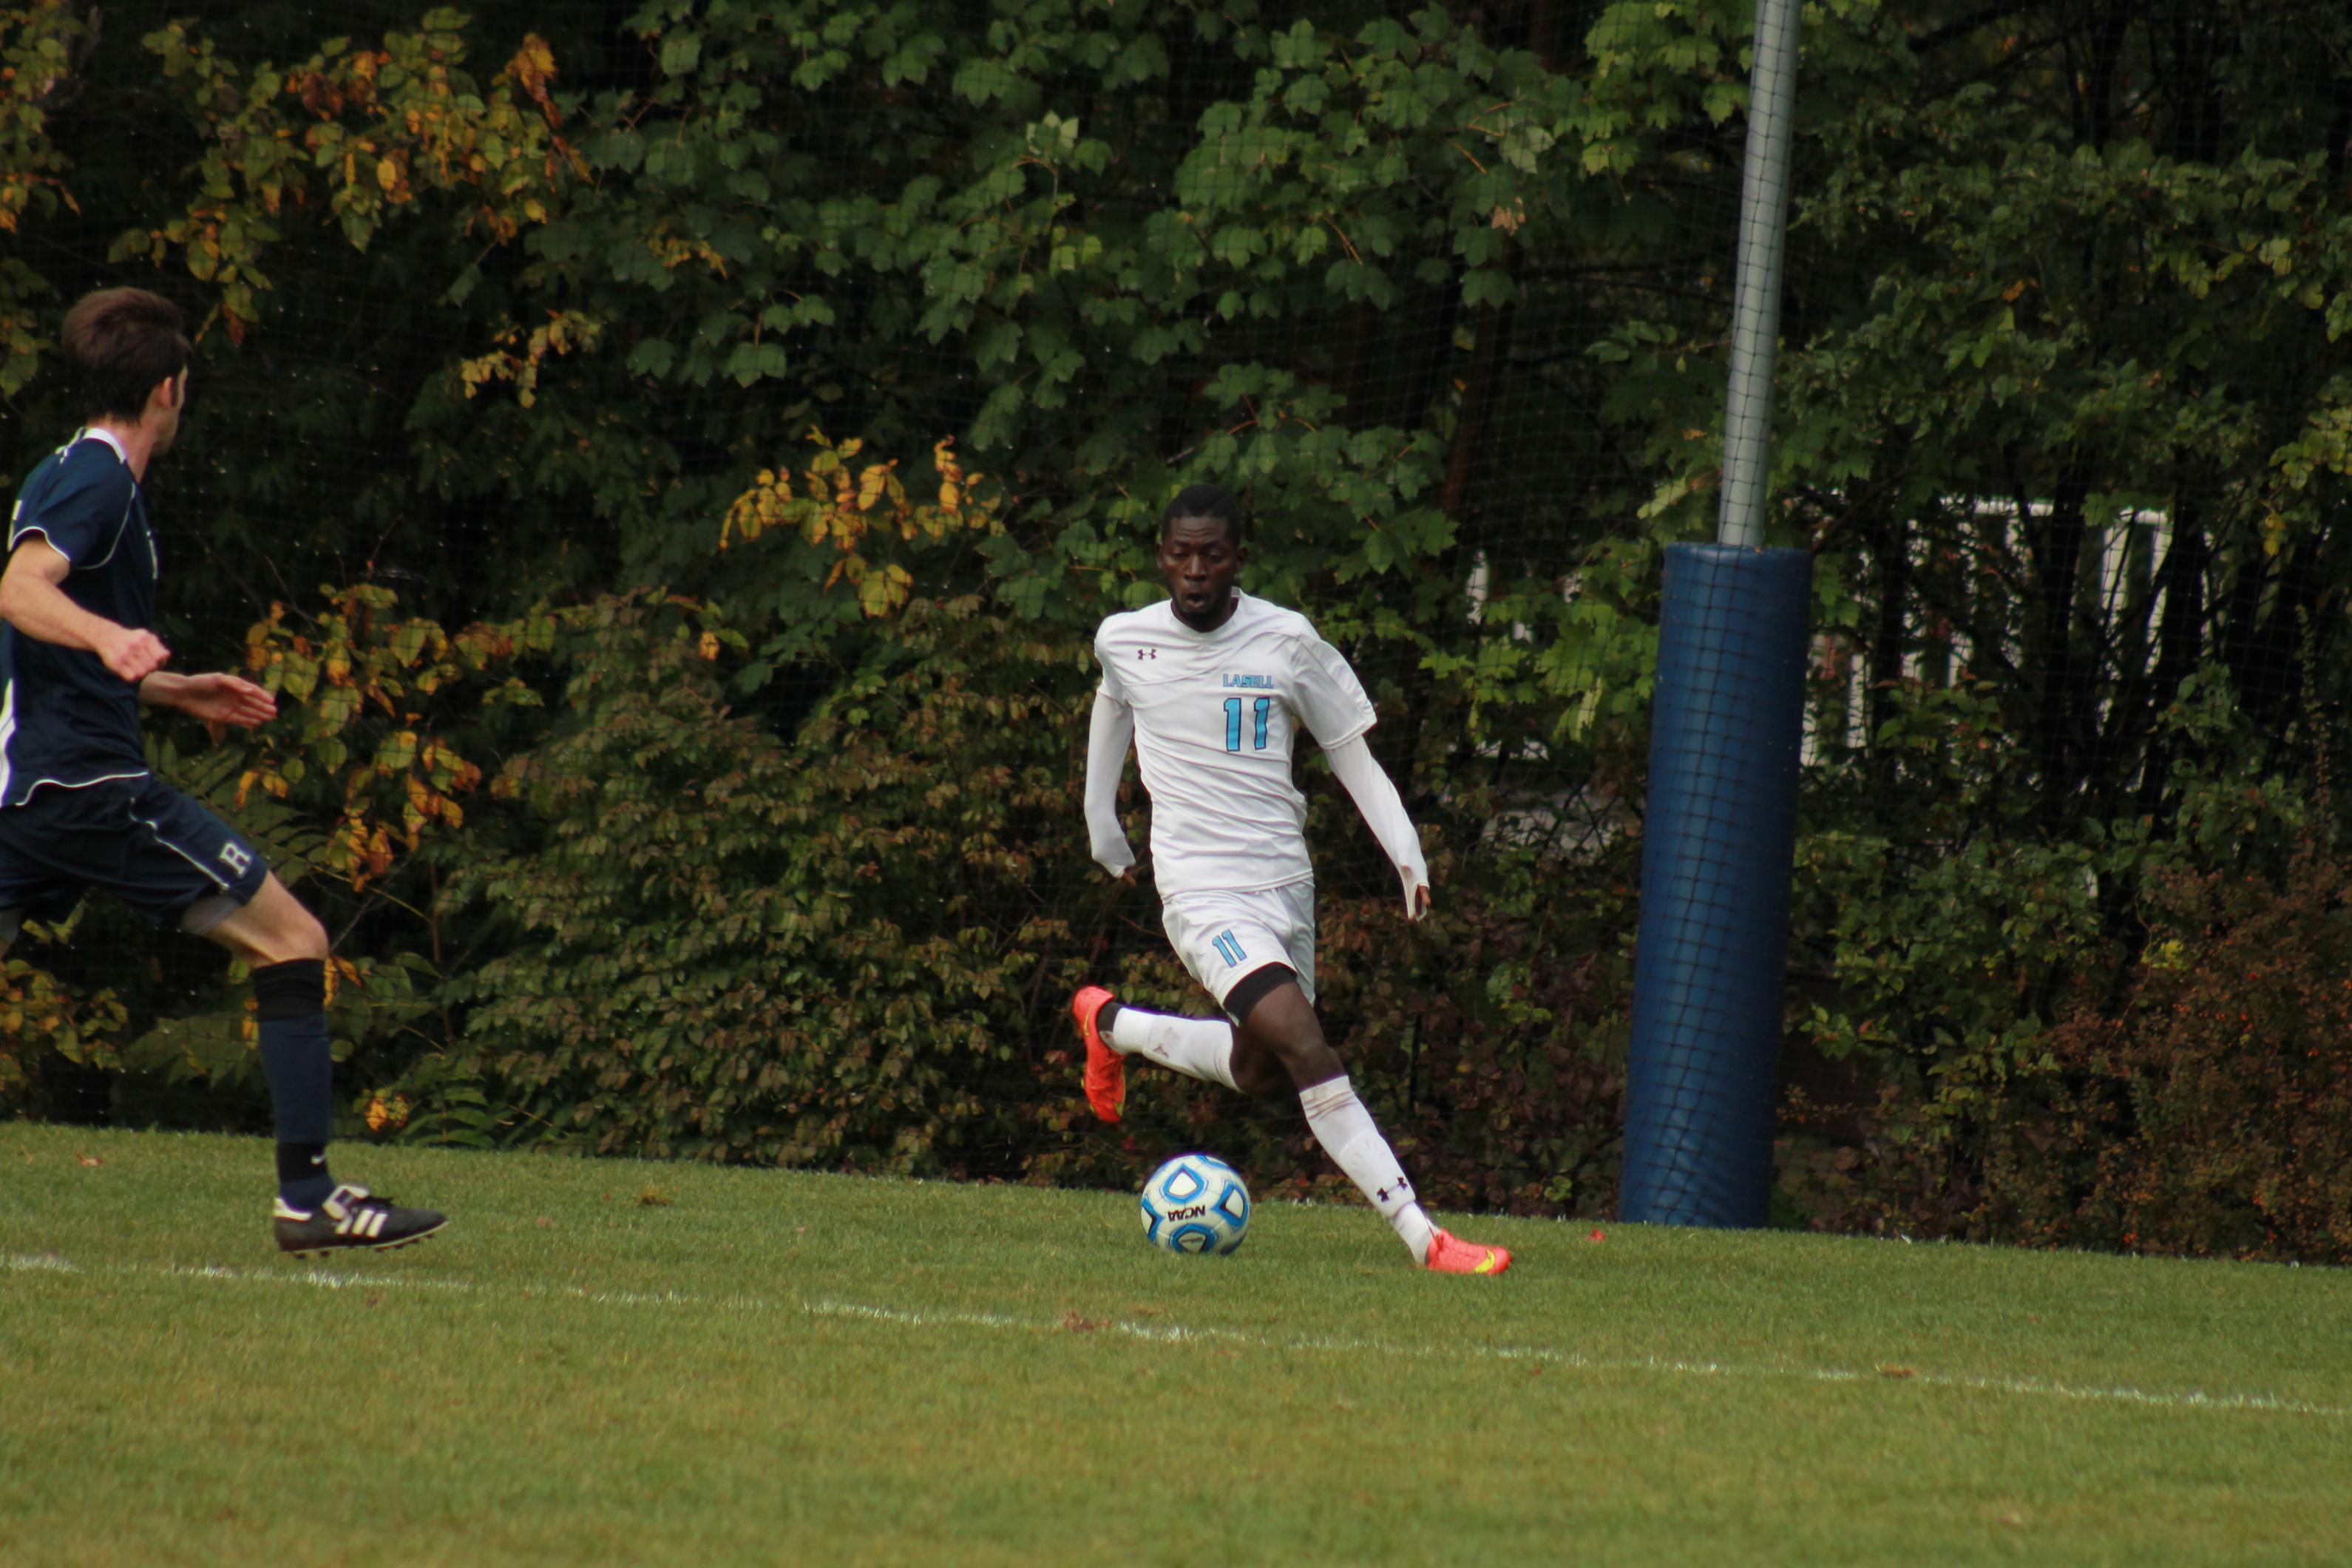 Wentworth Shuts Out Men's Soccer 3-0